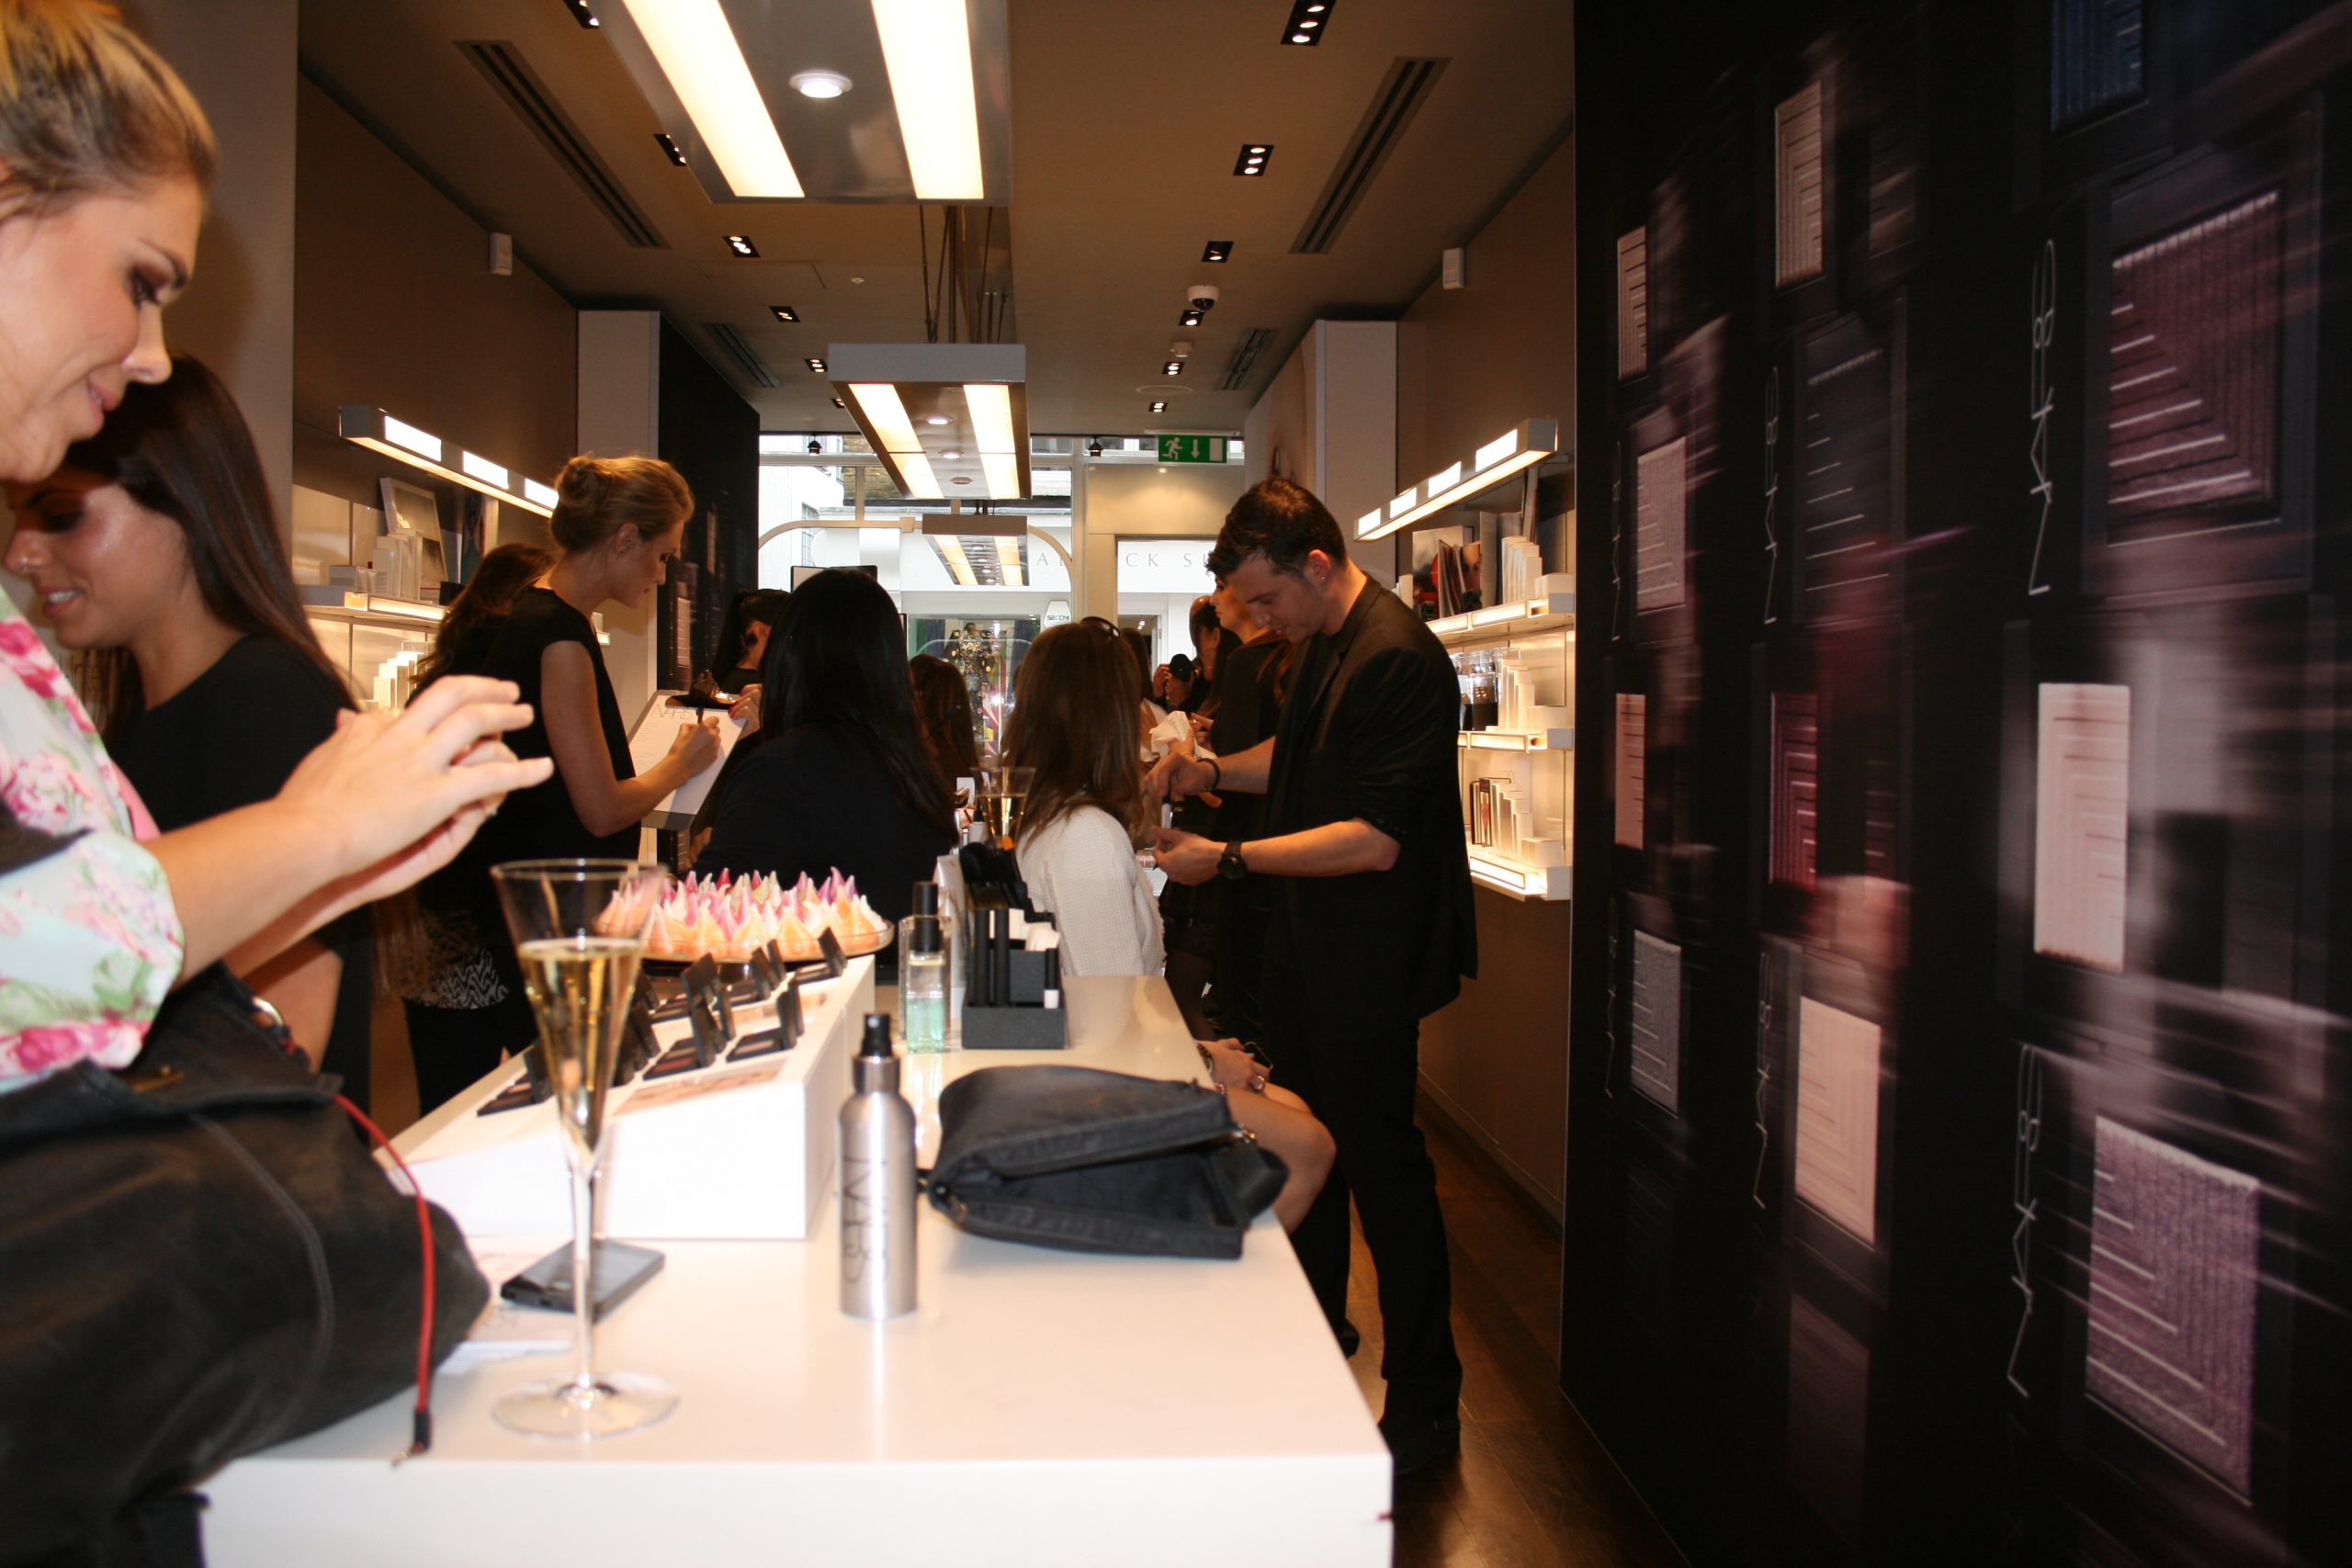 NARS Pop-Up Studio at Space NK (London Only)